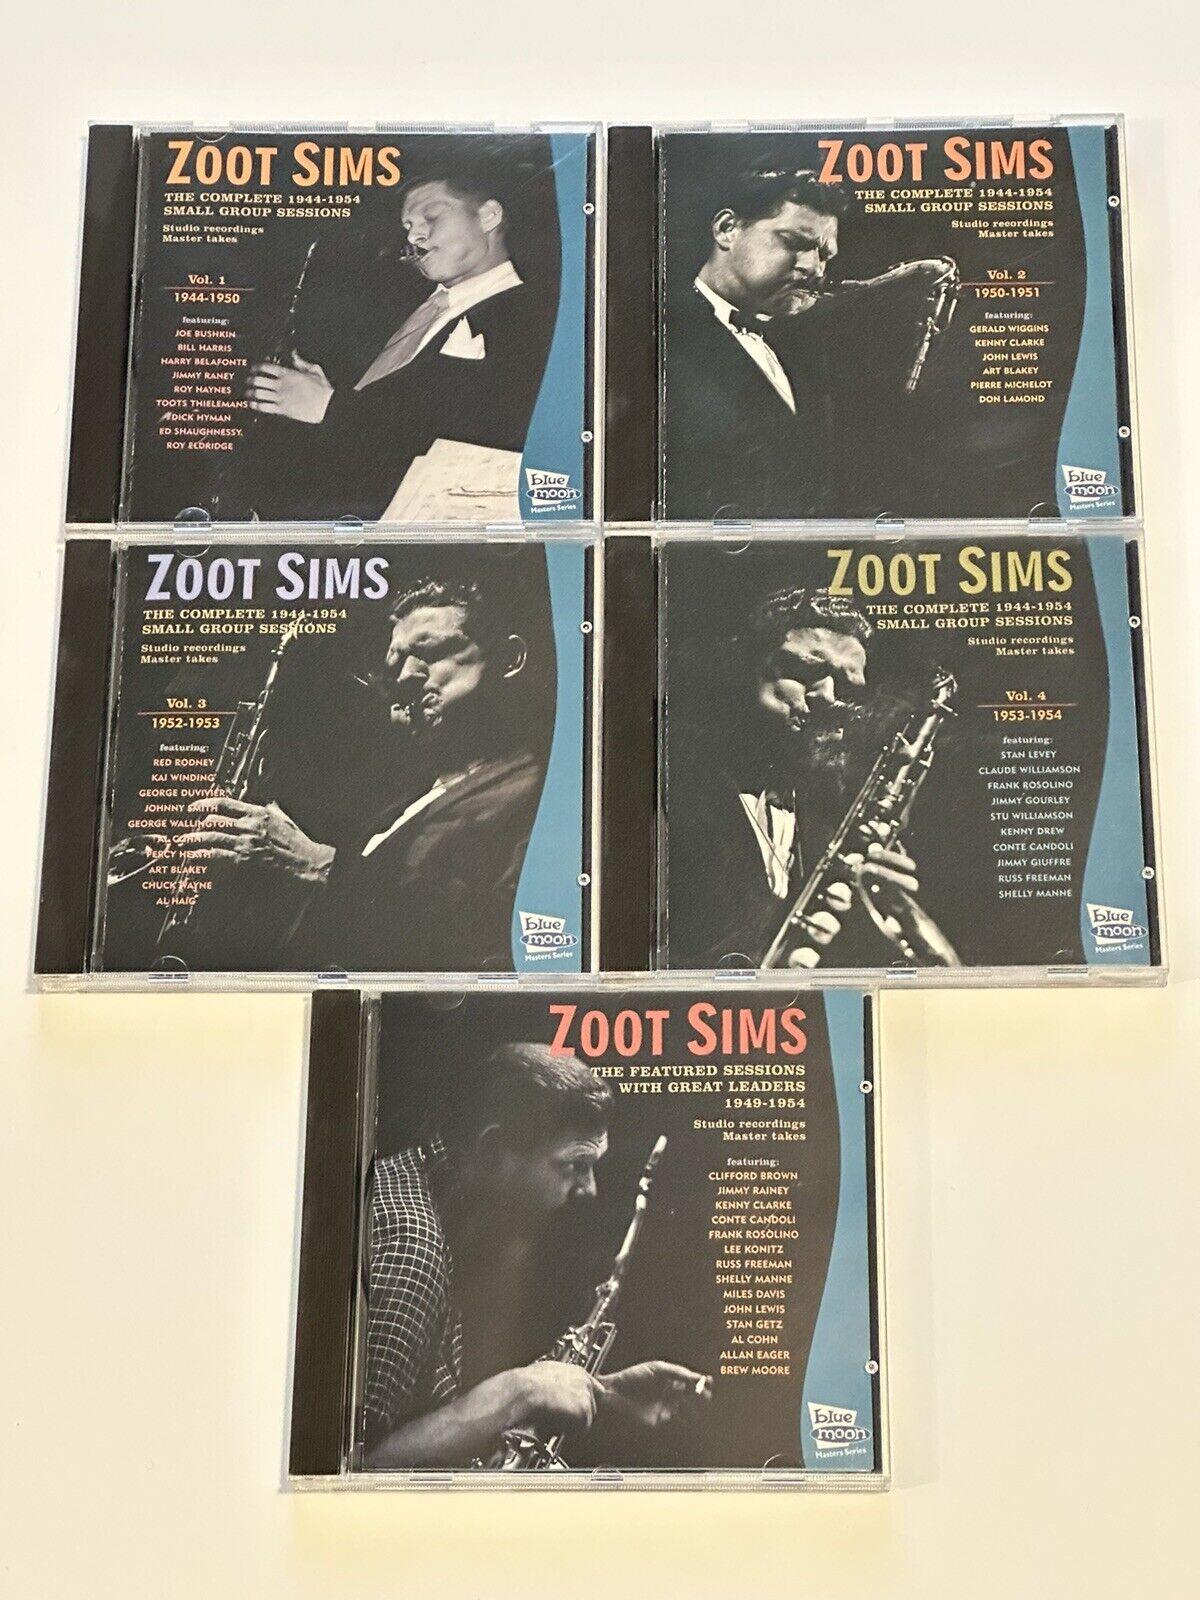 Zoot Sims The Complete Small Group Sessions - Vol. 1-4 & Great Leaders - CD Lot